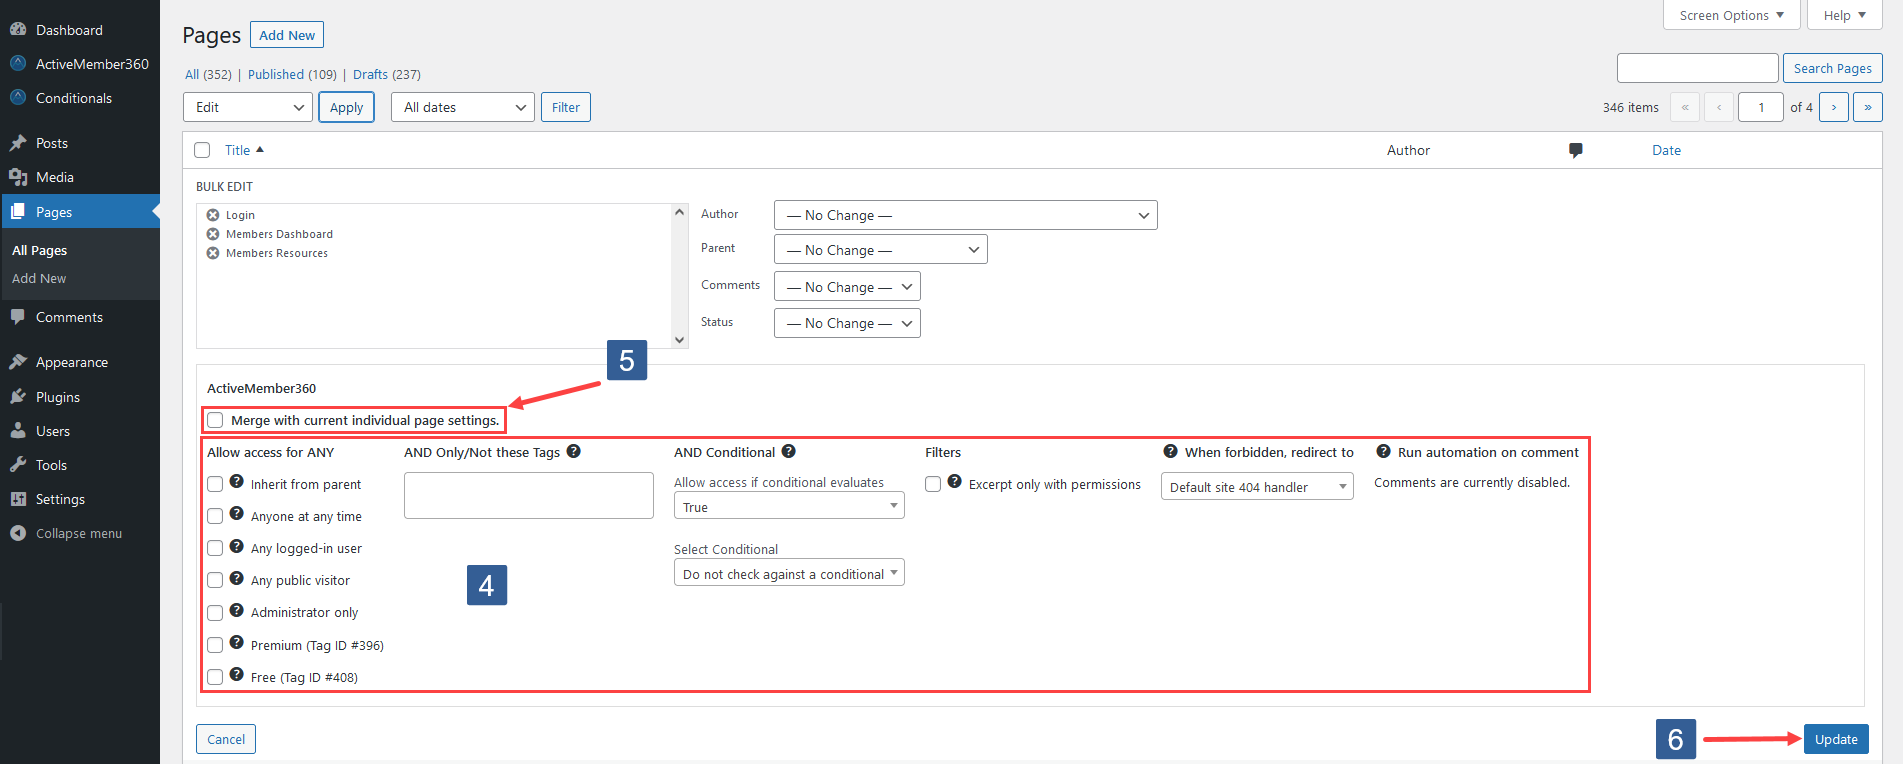 Steps for selecting the ActiveMember360 page/post settings to apply for the bulk edit